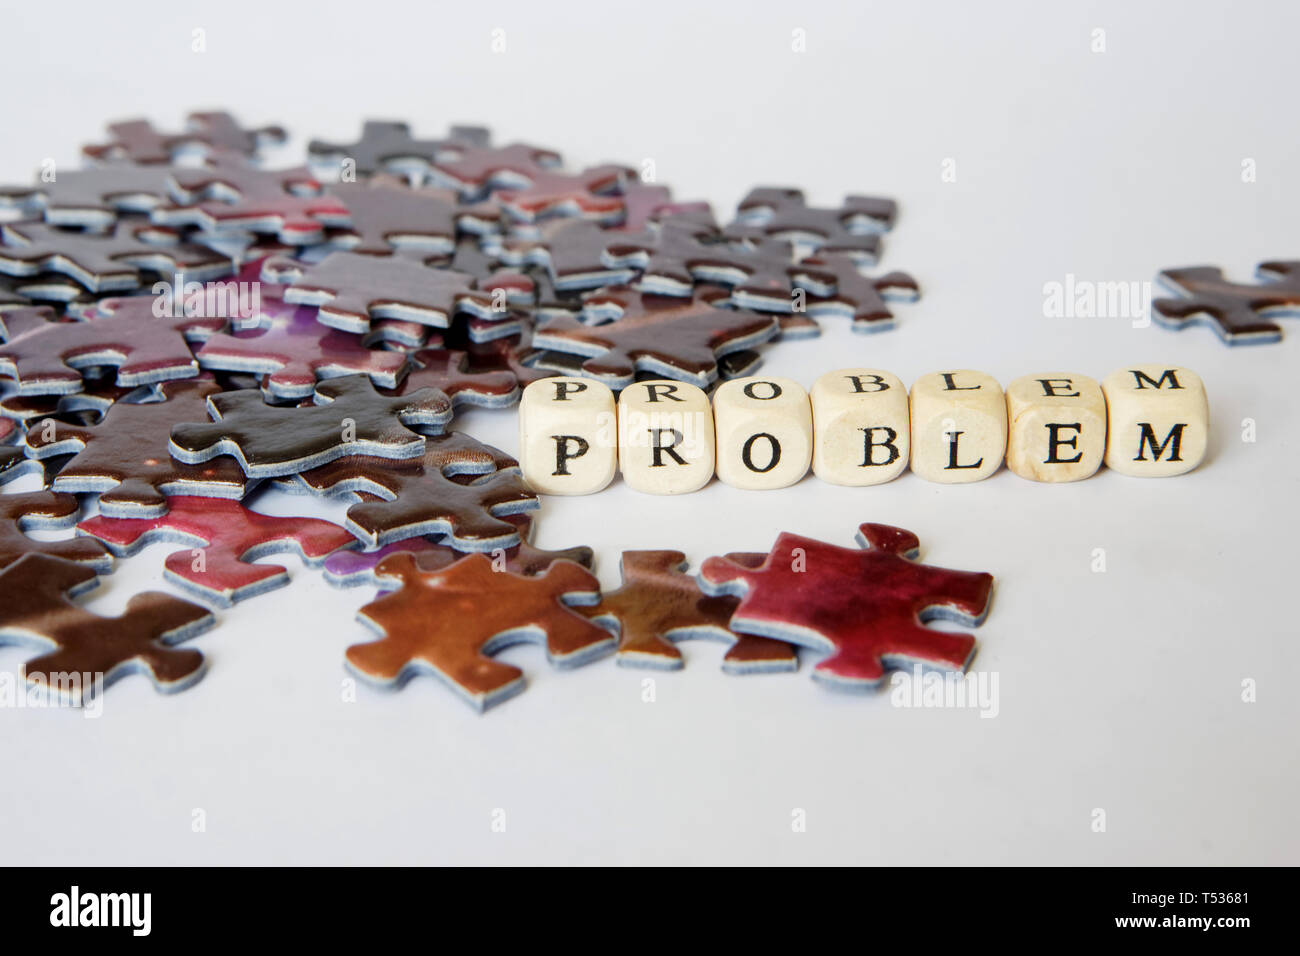 Difficult situation during the assembly of puzzles. Solving complex problems. Opportunities out of the problem situation. White background. Stock Photo